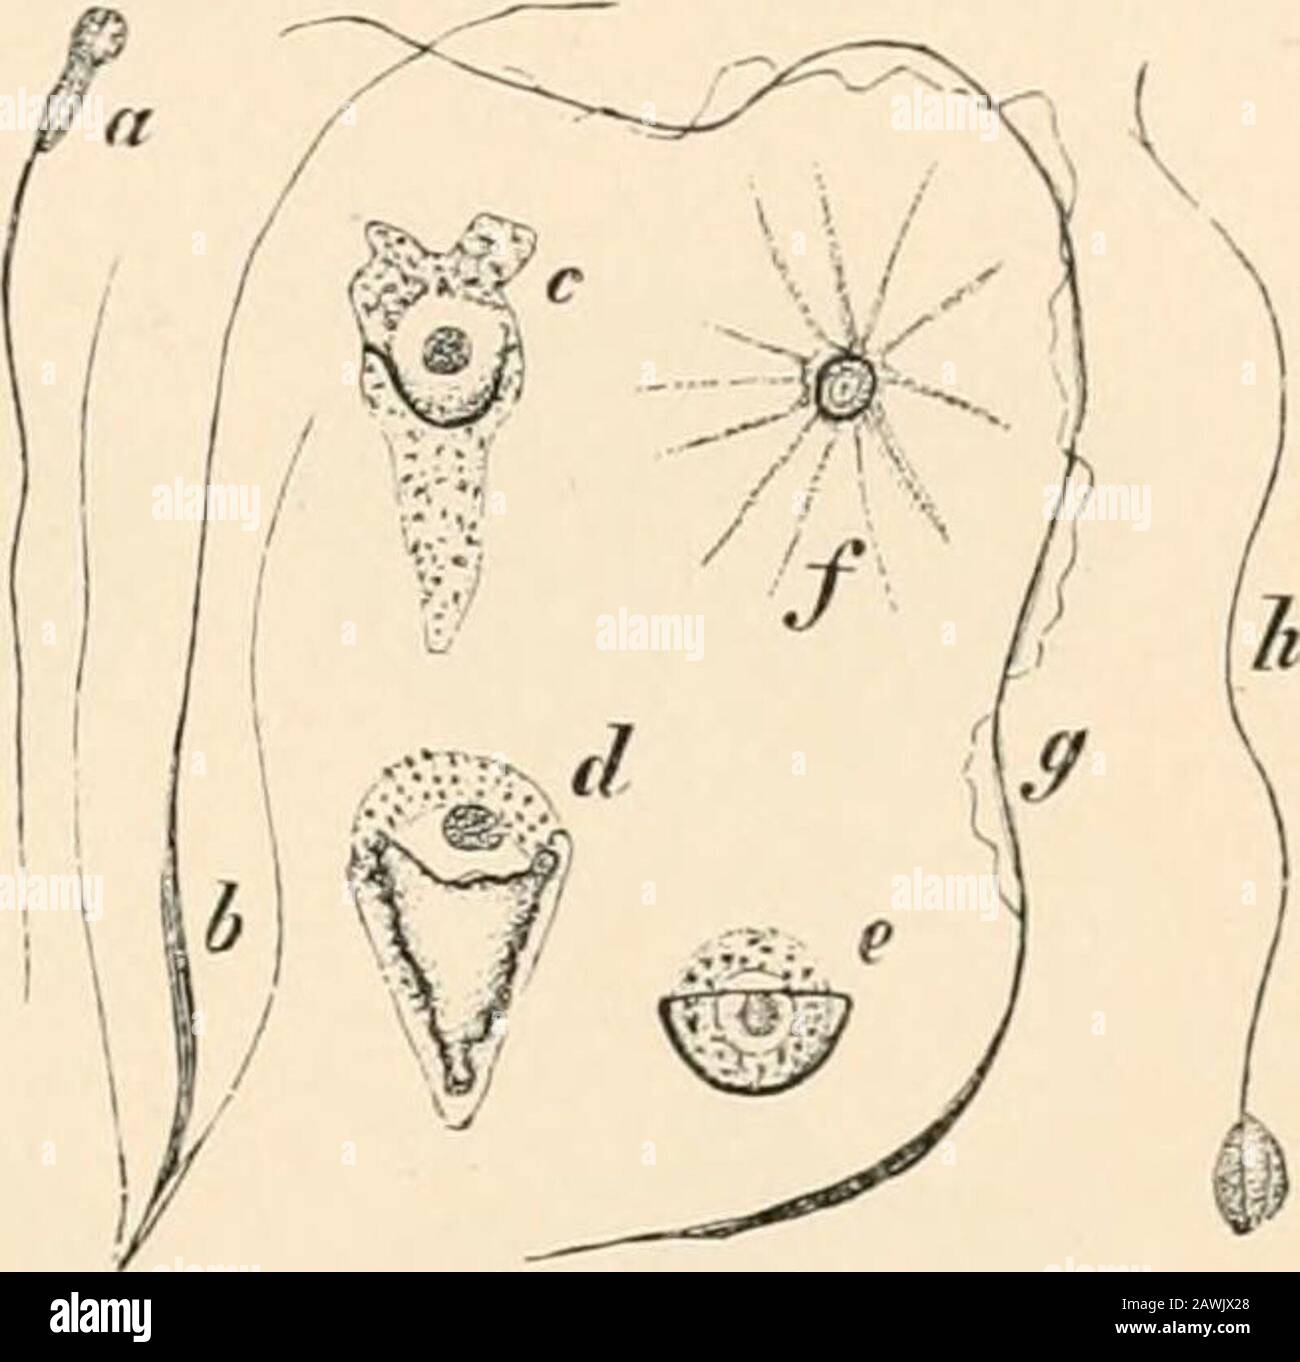 Text-book of comparative anatomy . lements, cells areproduced which are equivalent to egg-germs, and which may be distinguishedas sperm germs. Whereas, however,the egg germs become eggs direct bymeans of growth and maturation, thesperm germs are still further divided i Y7^ 1, -&gt; tozoa. «. Of a Mammal ; b, of a Turbel- and produce spermatozoa. We have larian&gt; wi;h two accessory fla,,ella. Cj t?jalready seen a phenomenon similar, ;md e, of Nematoda; /, of a Crustacean; though not in all points parallel, in ..of a Salamander (with undulating mem-,, -. ° ,. 11 r ii  1 brane);7i, The commone Stock Photo